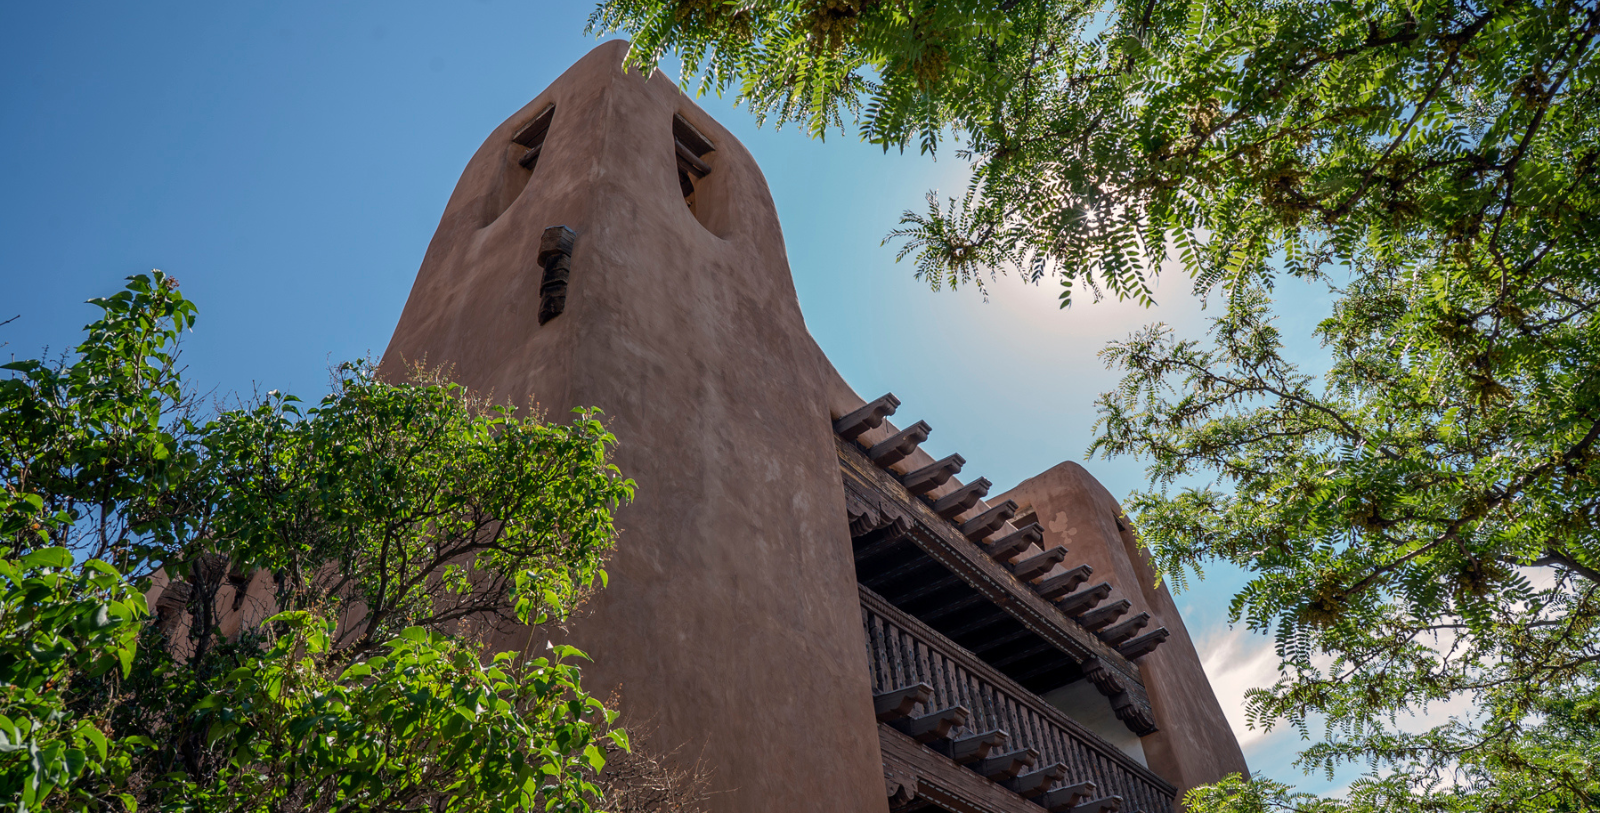 Discover the Spanish Colonial architecture of Old Santa Fe Inn.